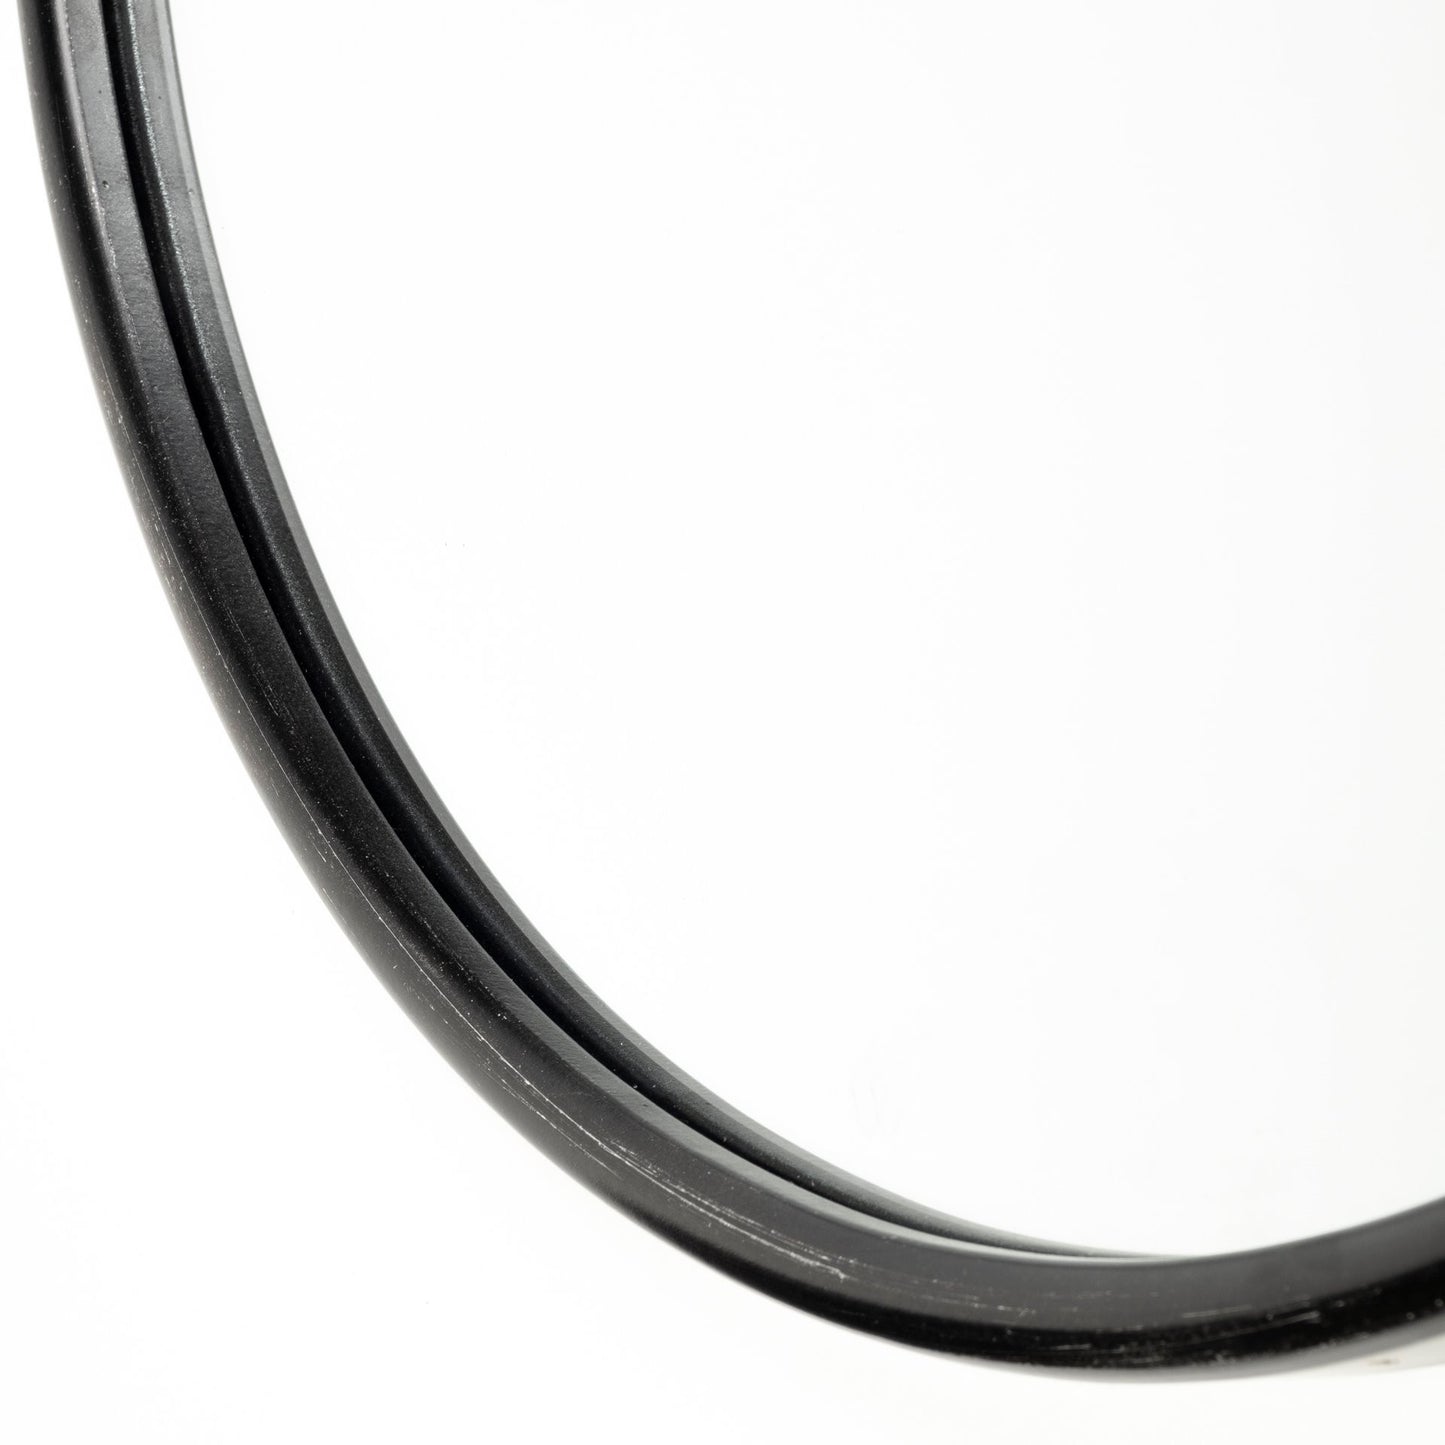 Black Oval Accent Metal Mirror